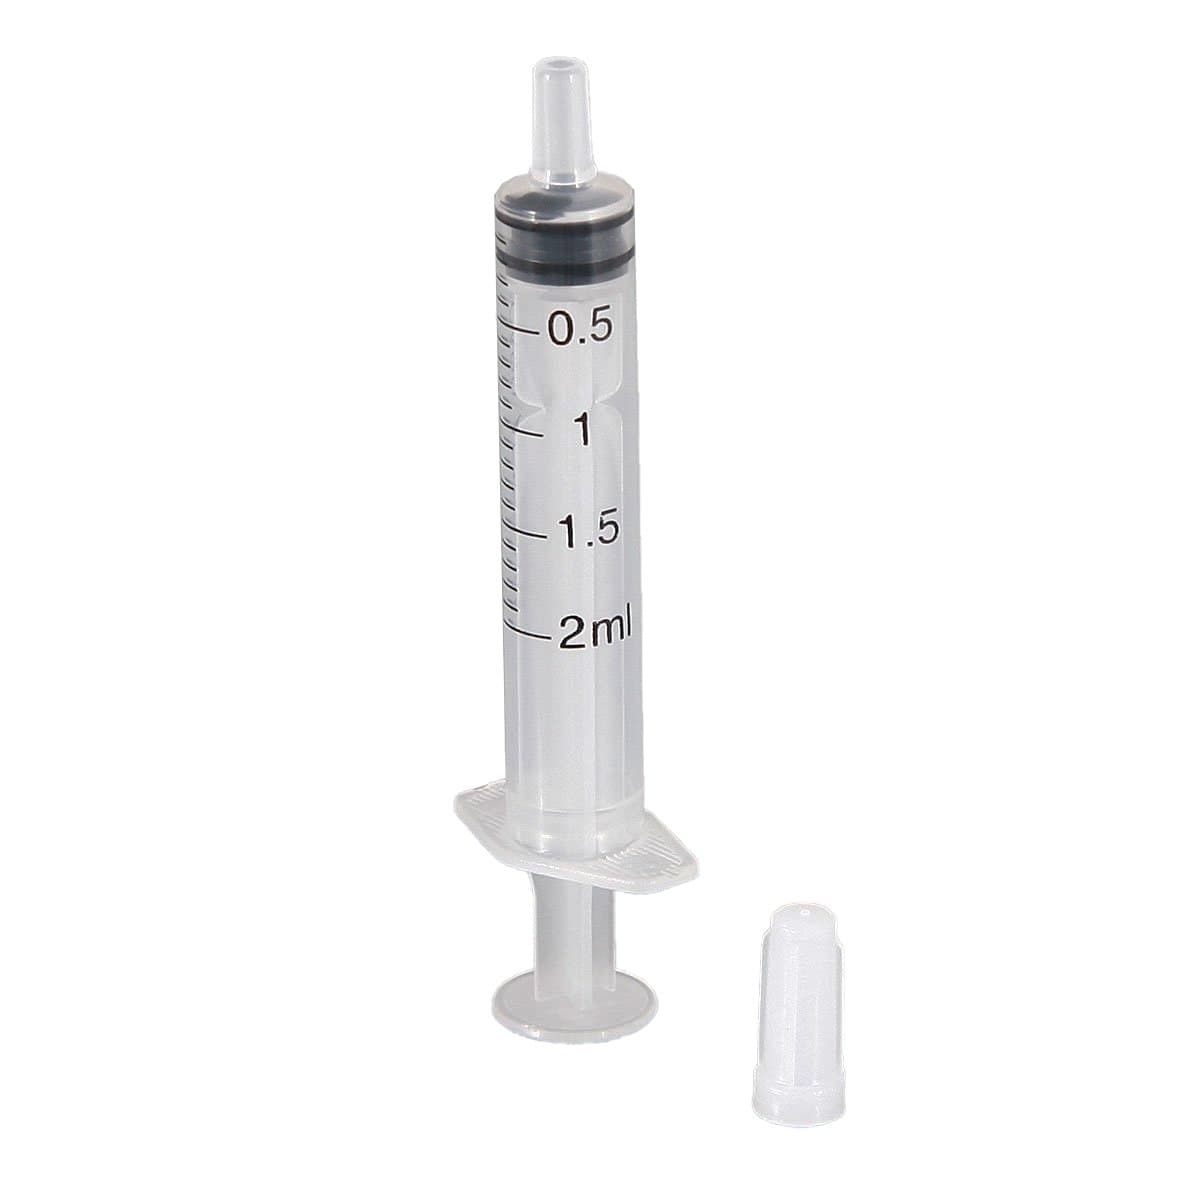 Disposable Blunt Tip Syringe for Concentrates and Oils